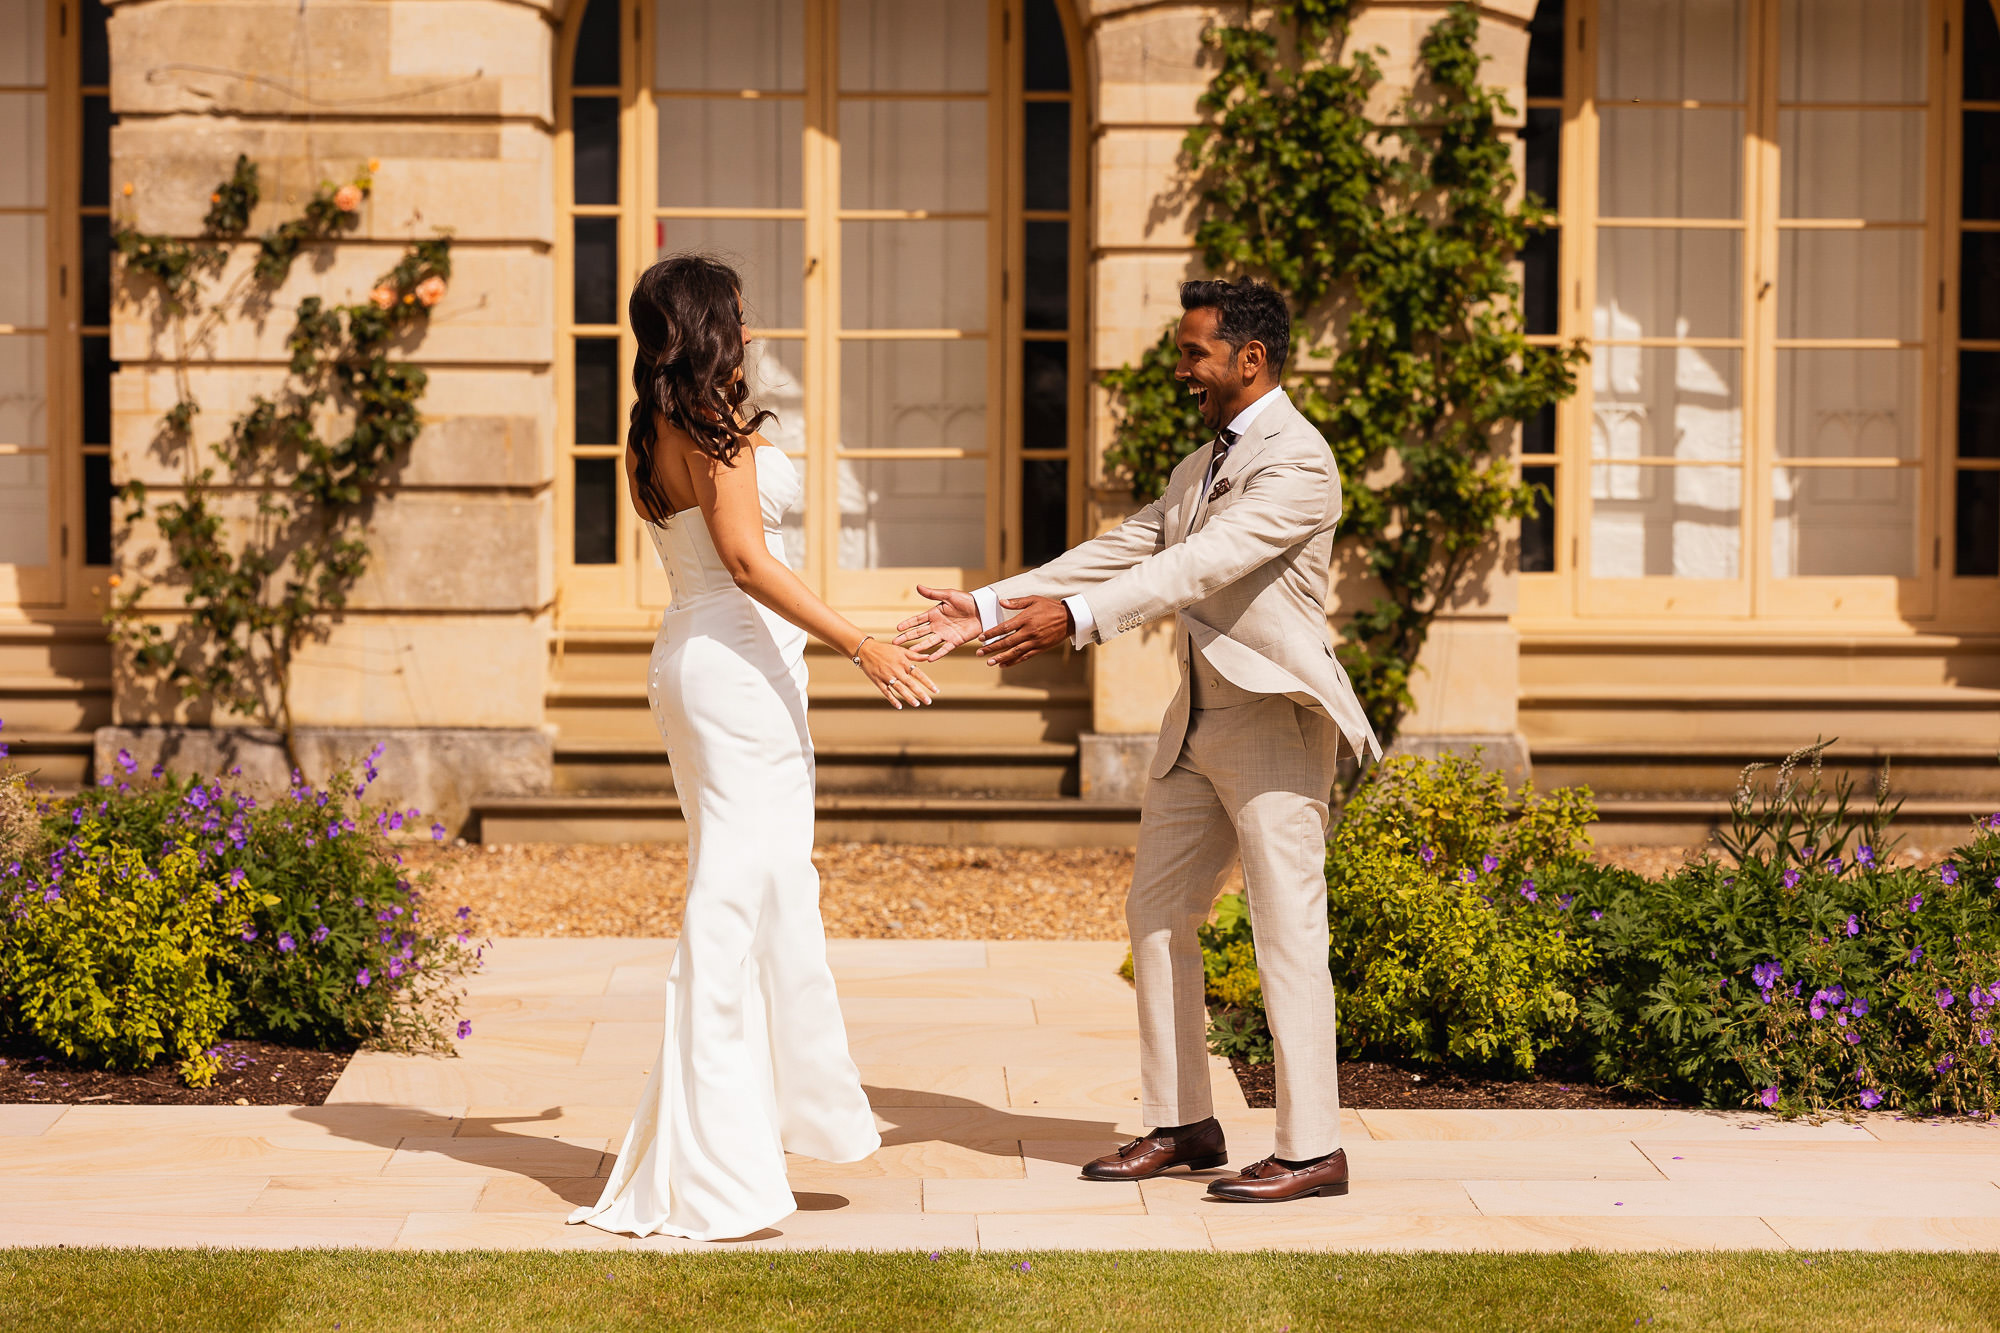 Stowe House, Civil Ceremony, Hindu Wedding, Multicultural Wedding Photographer, first look